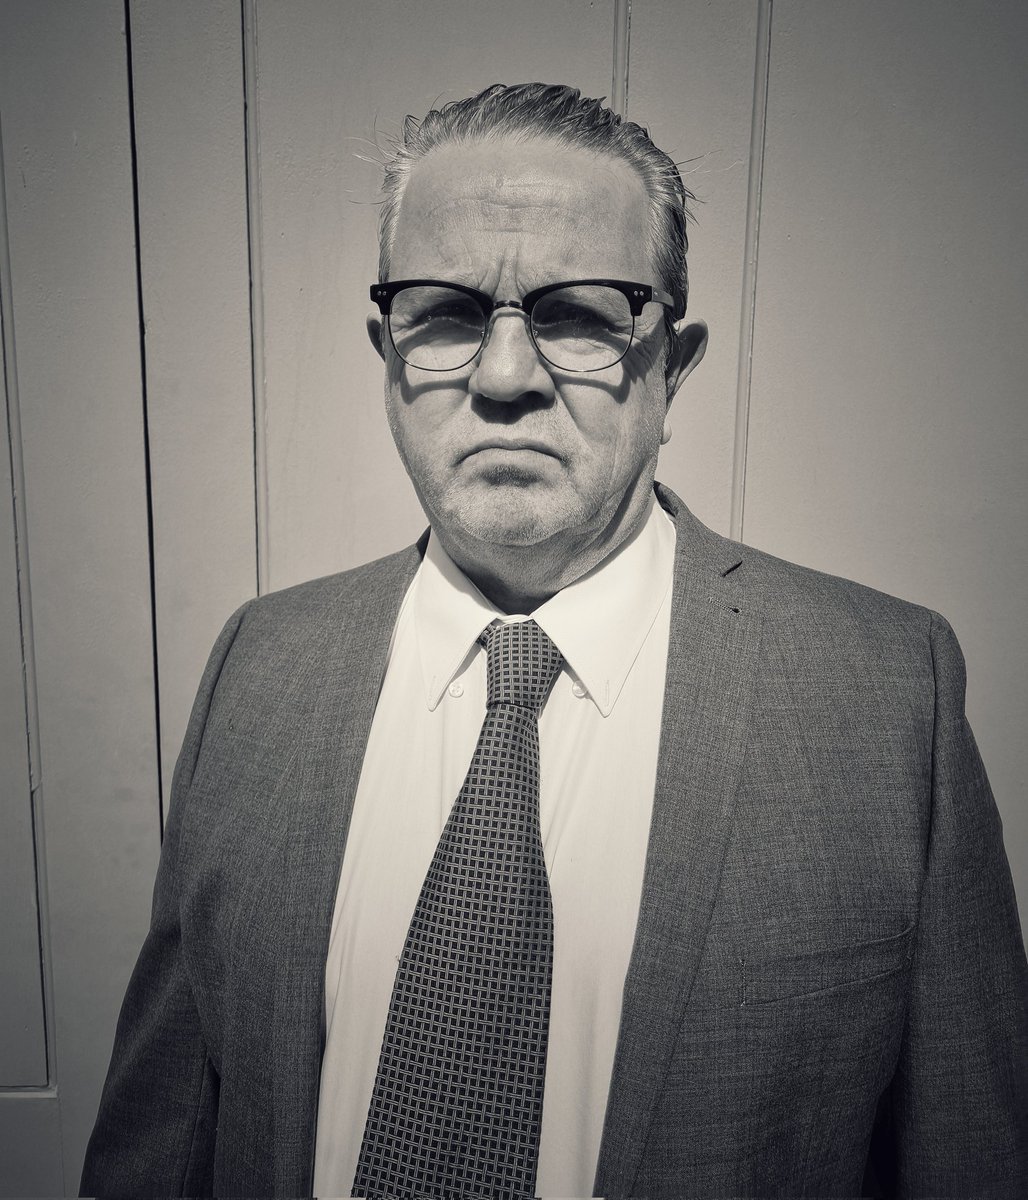 George Oldfield joined the police force in 1947, taking command of the investigation into the IRA bombing on the M62 prior to taking charge of the Yorkshire Ripper investigation. The Incident Room @RondoTheatre 1-4 May ticketsource.co.uk/rondotheatre (Photo: actor Mark Hale)